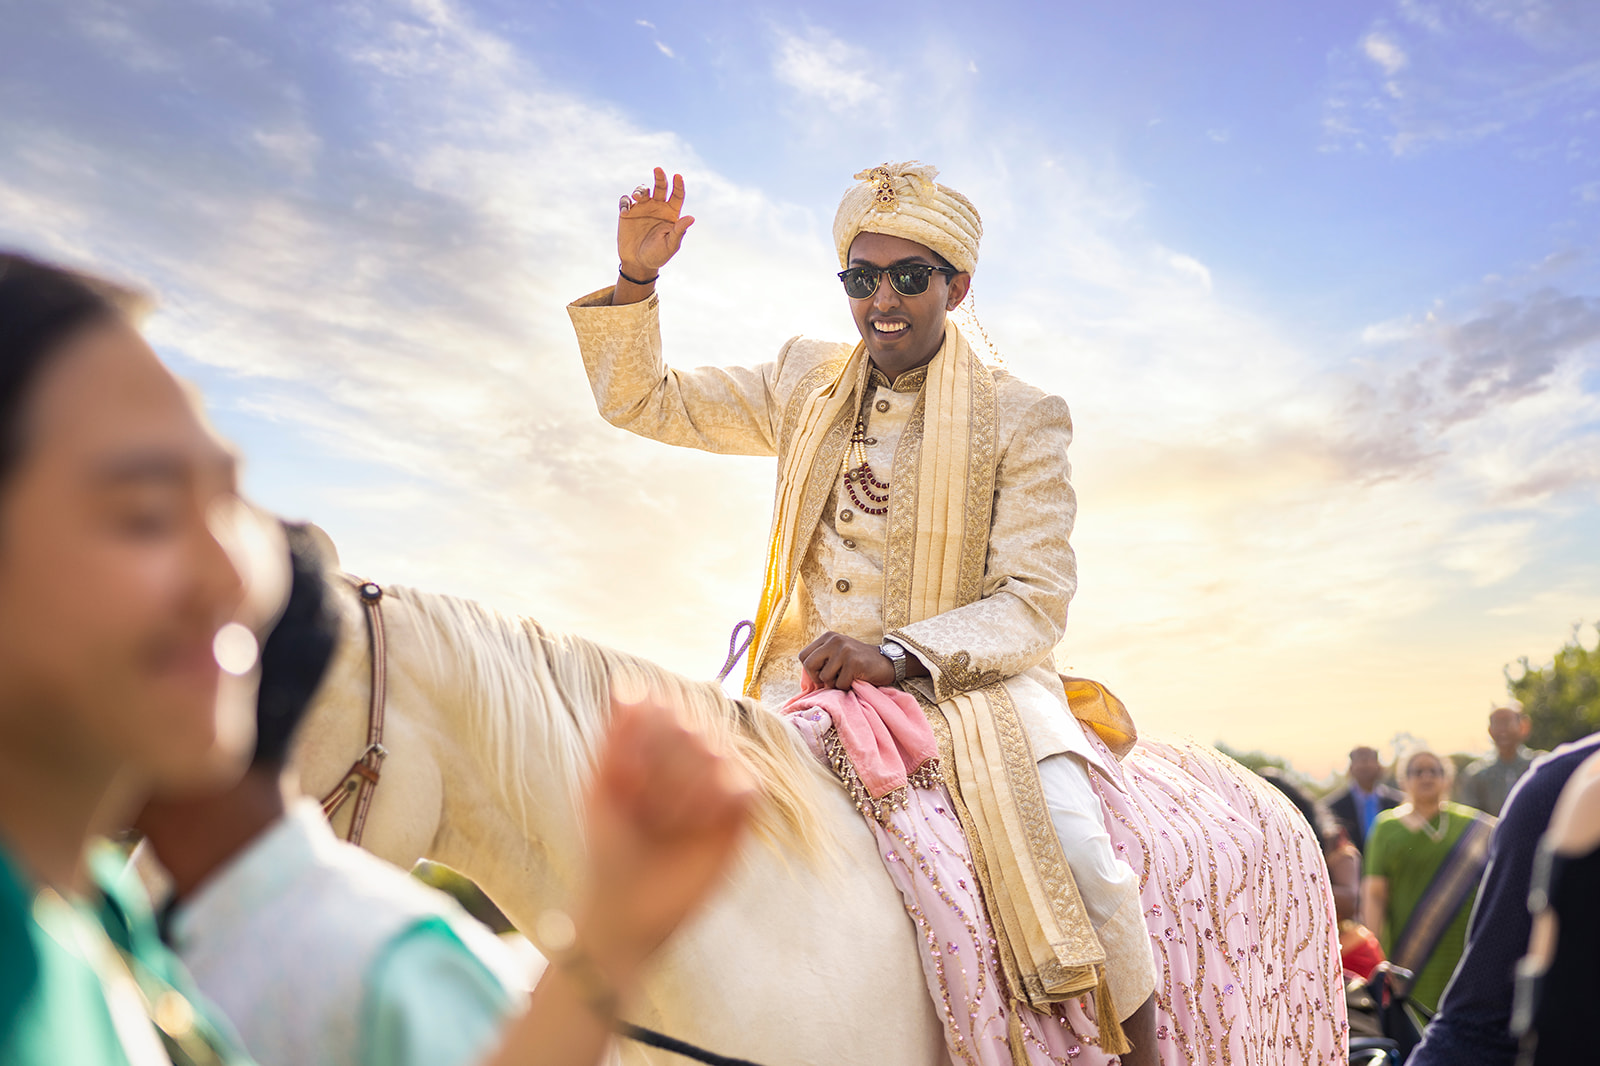 Indian groom waives to onlookers on top of a horse during barat at Renstorff House.